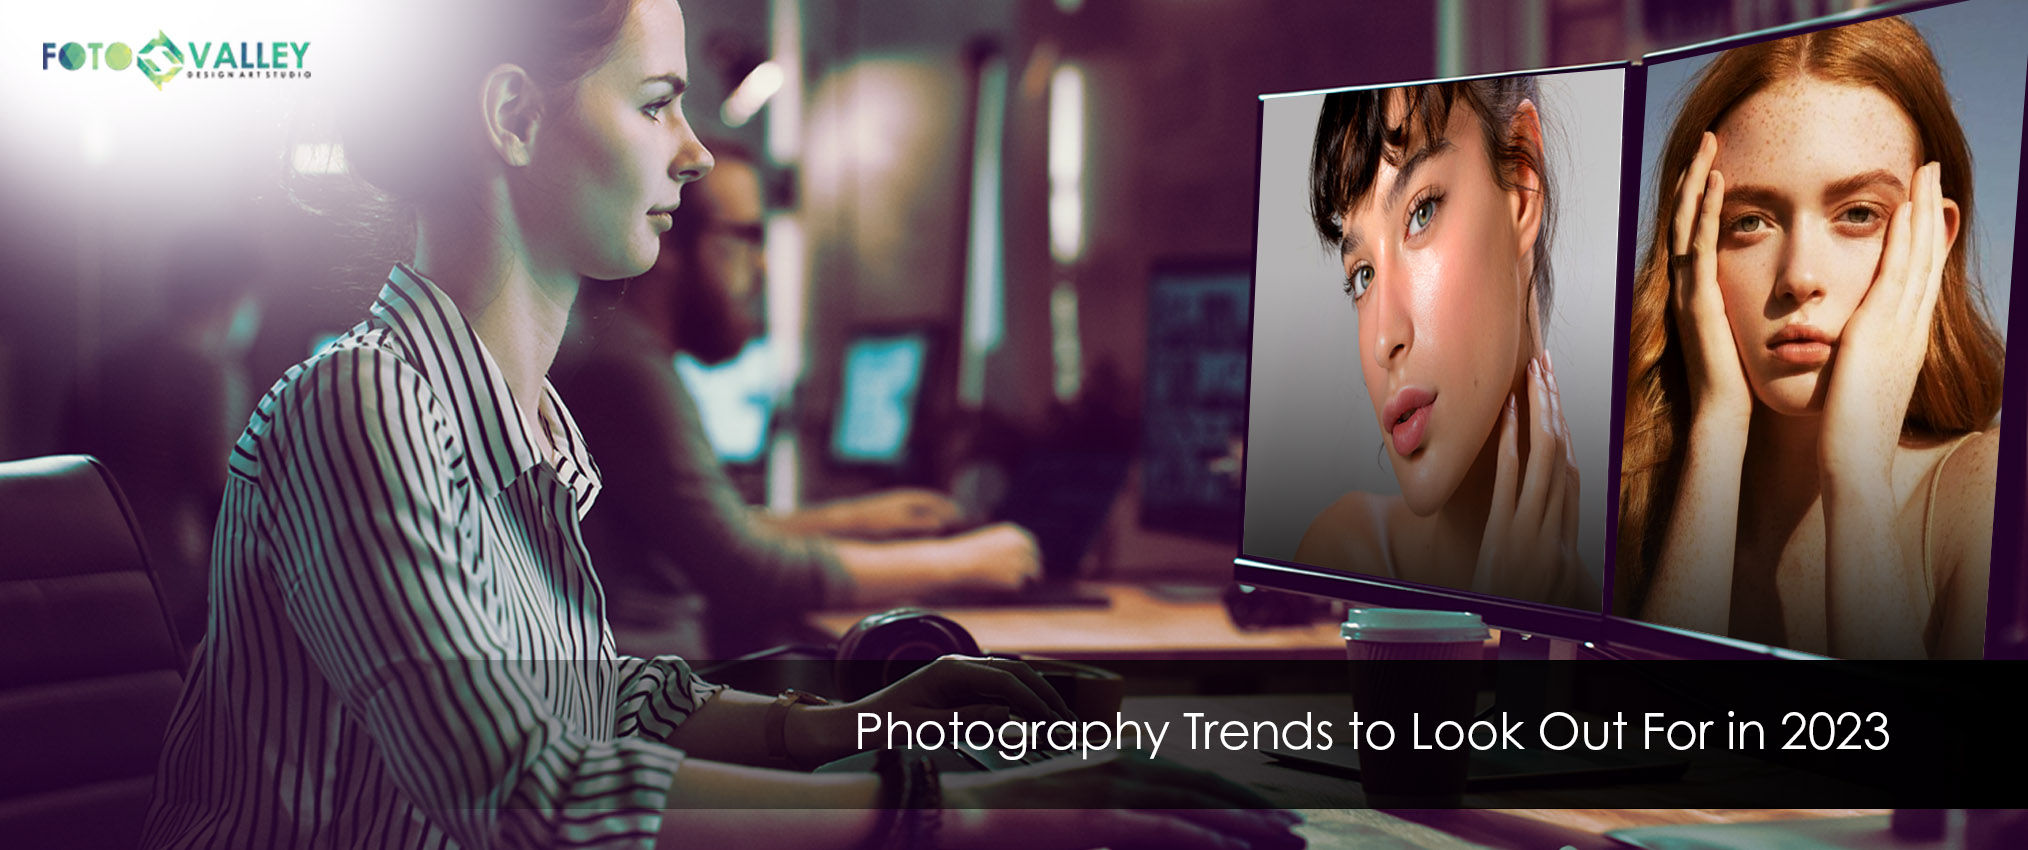 Photography Trends to Look Out For in 2023